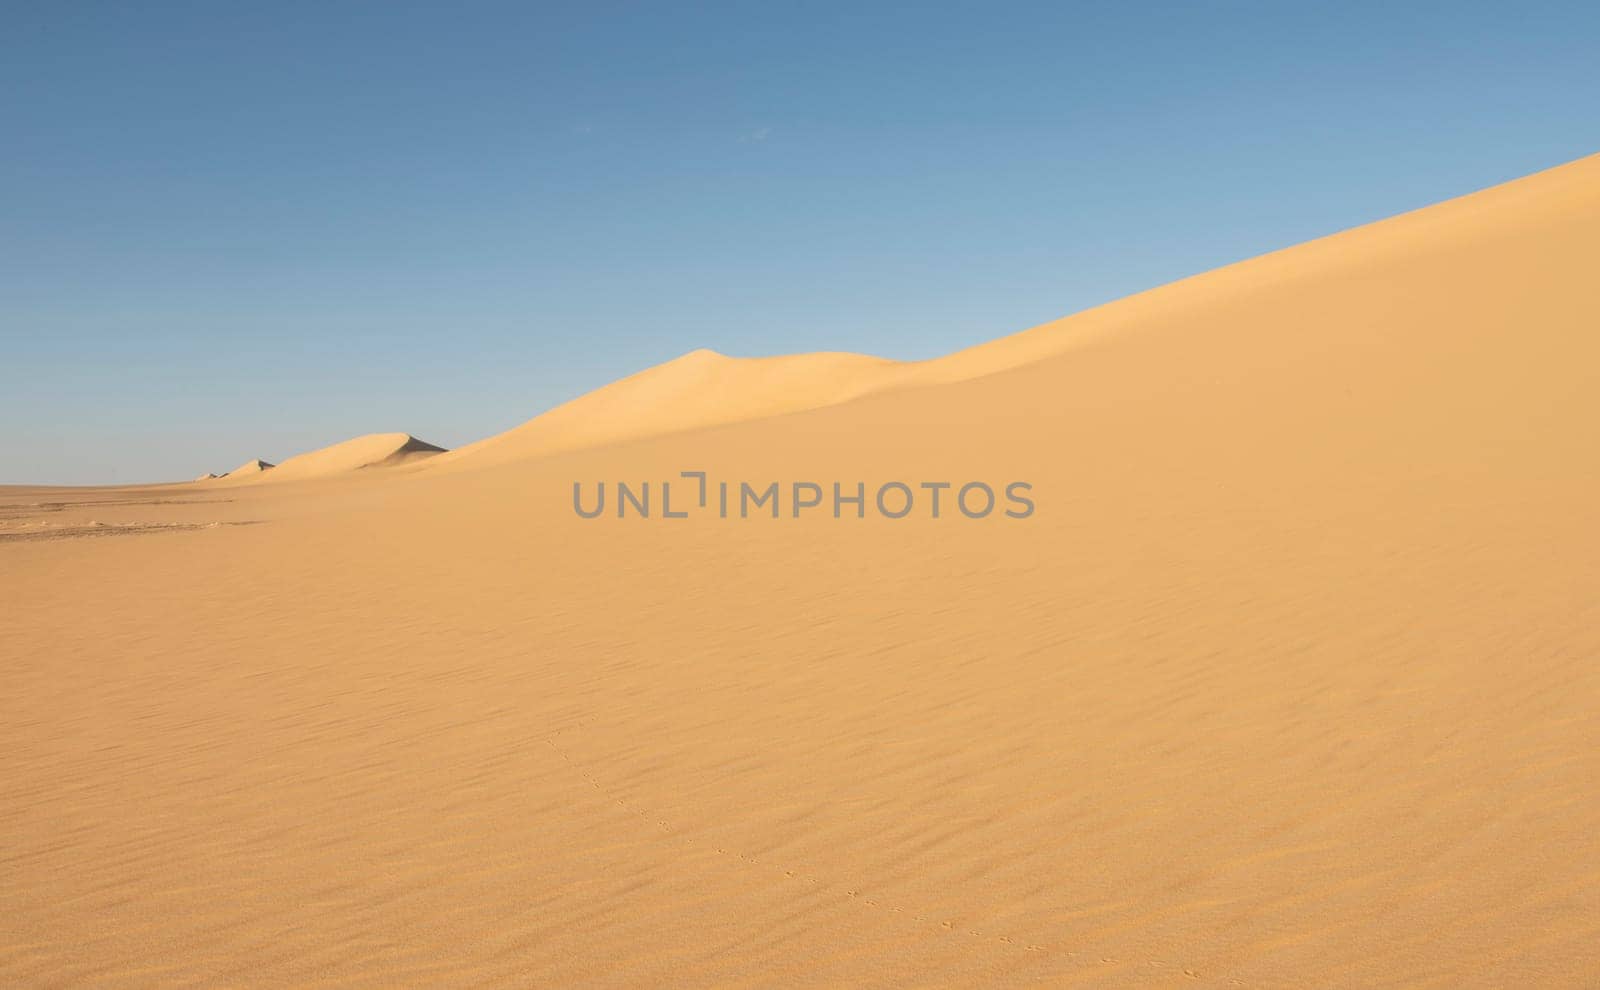 Landscape scenic view of desolate barren western desert in Egypt with Karaween large sand dunes against blue sky background